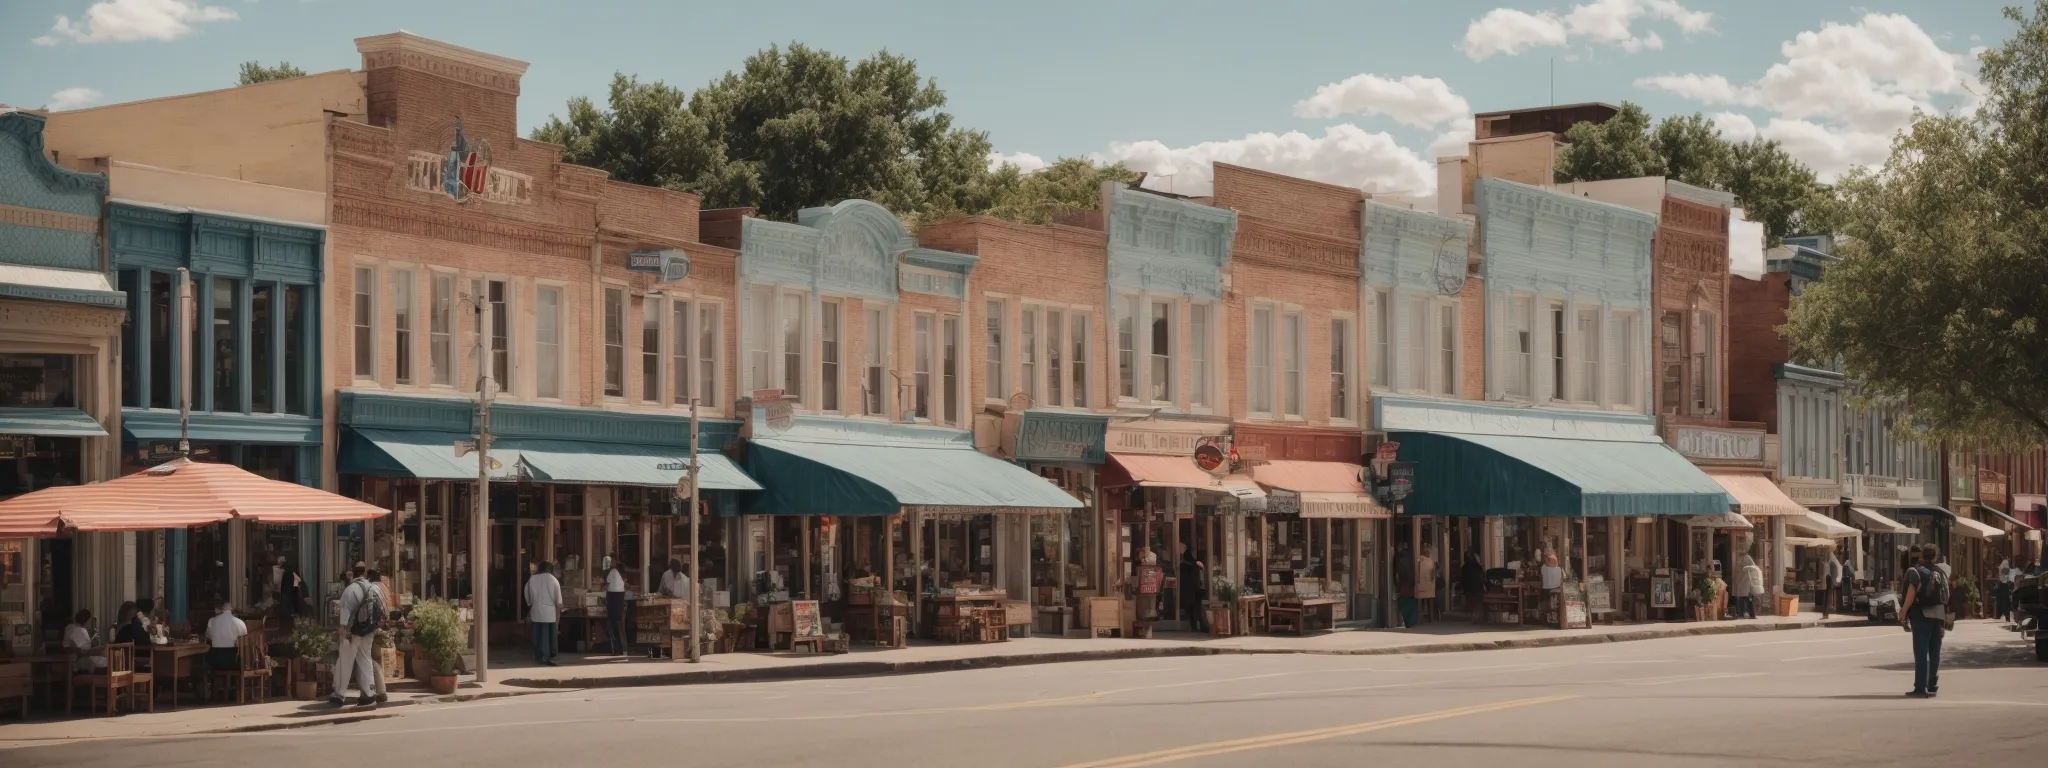 a bustling small-town main street with independent shops and restaurants, under a clear sky.